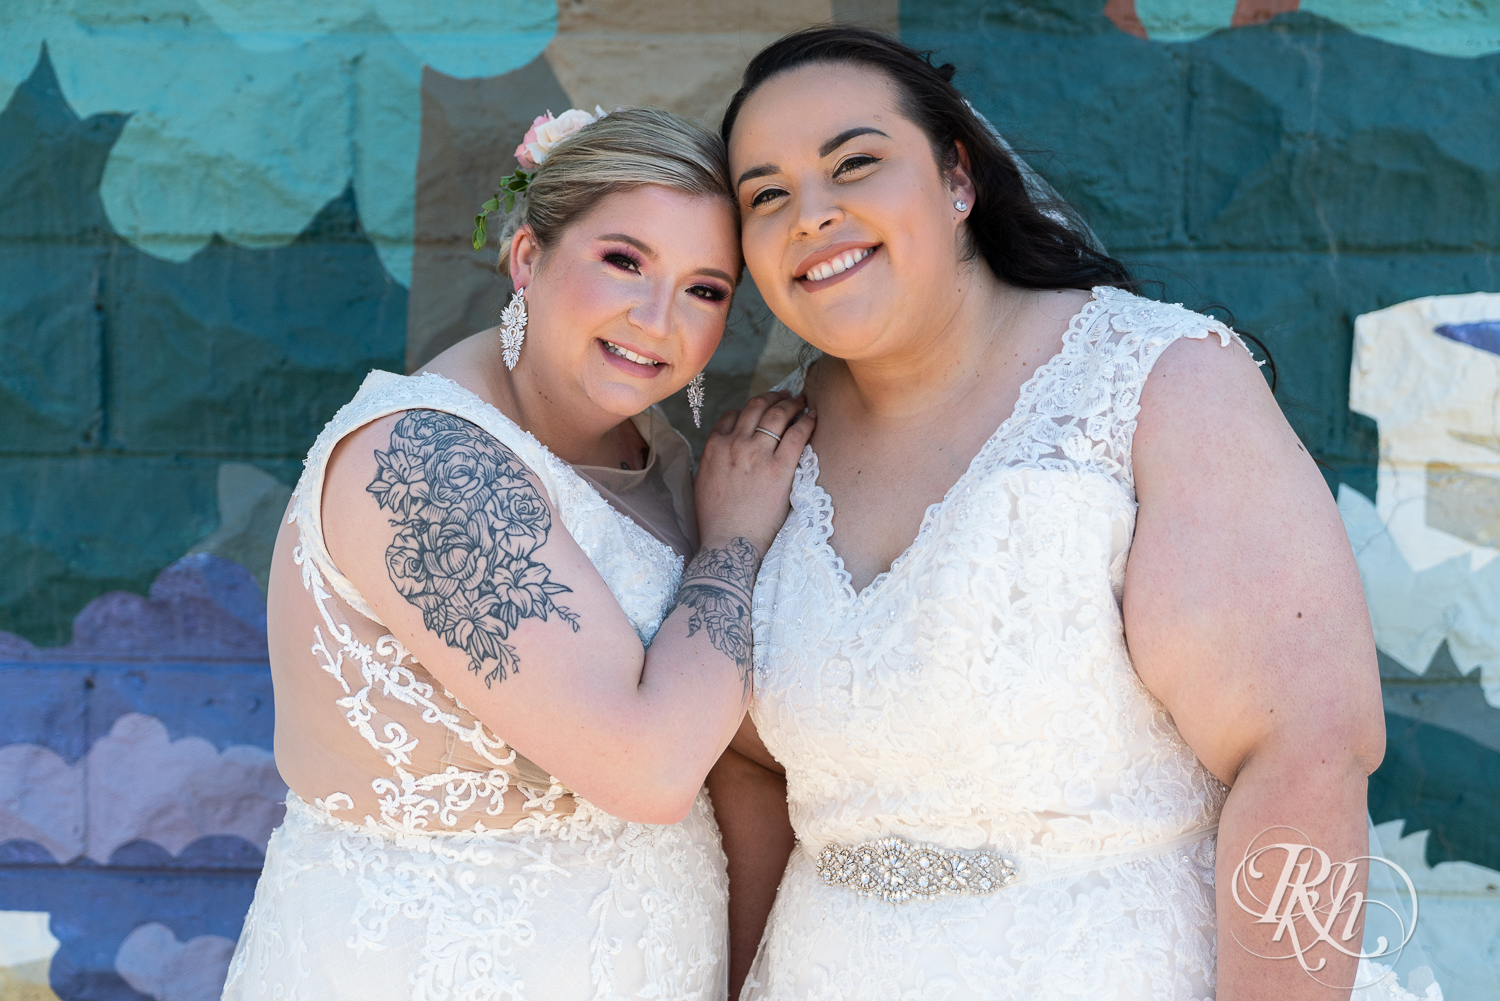 Lesbian brides smile during wedding day at Cannon River Winery in Cannon Falls, Minnesota.